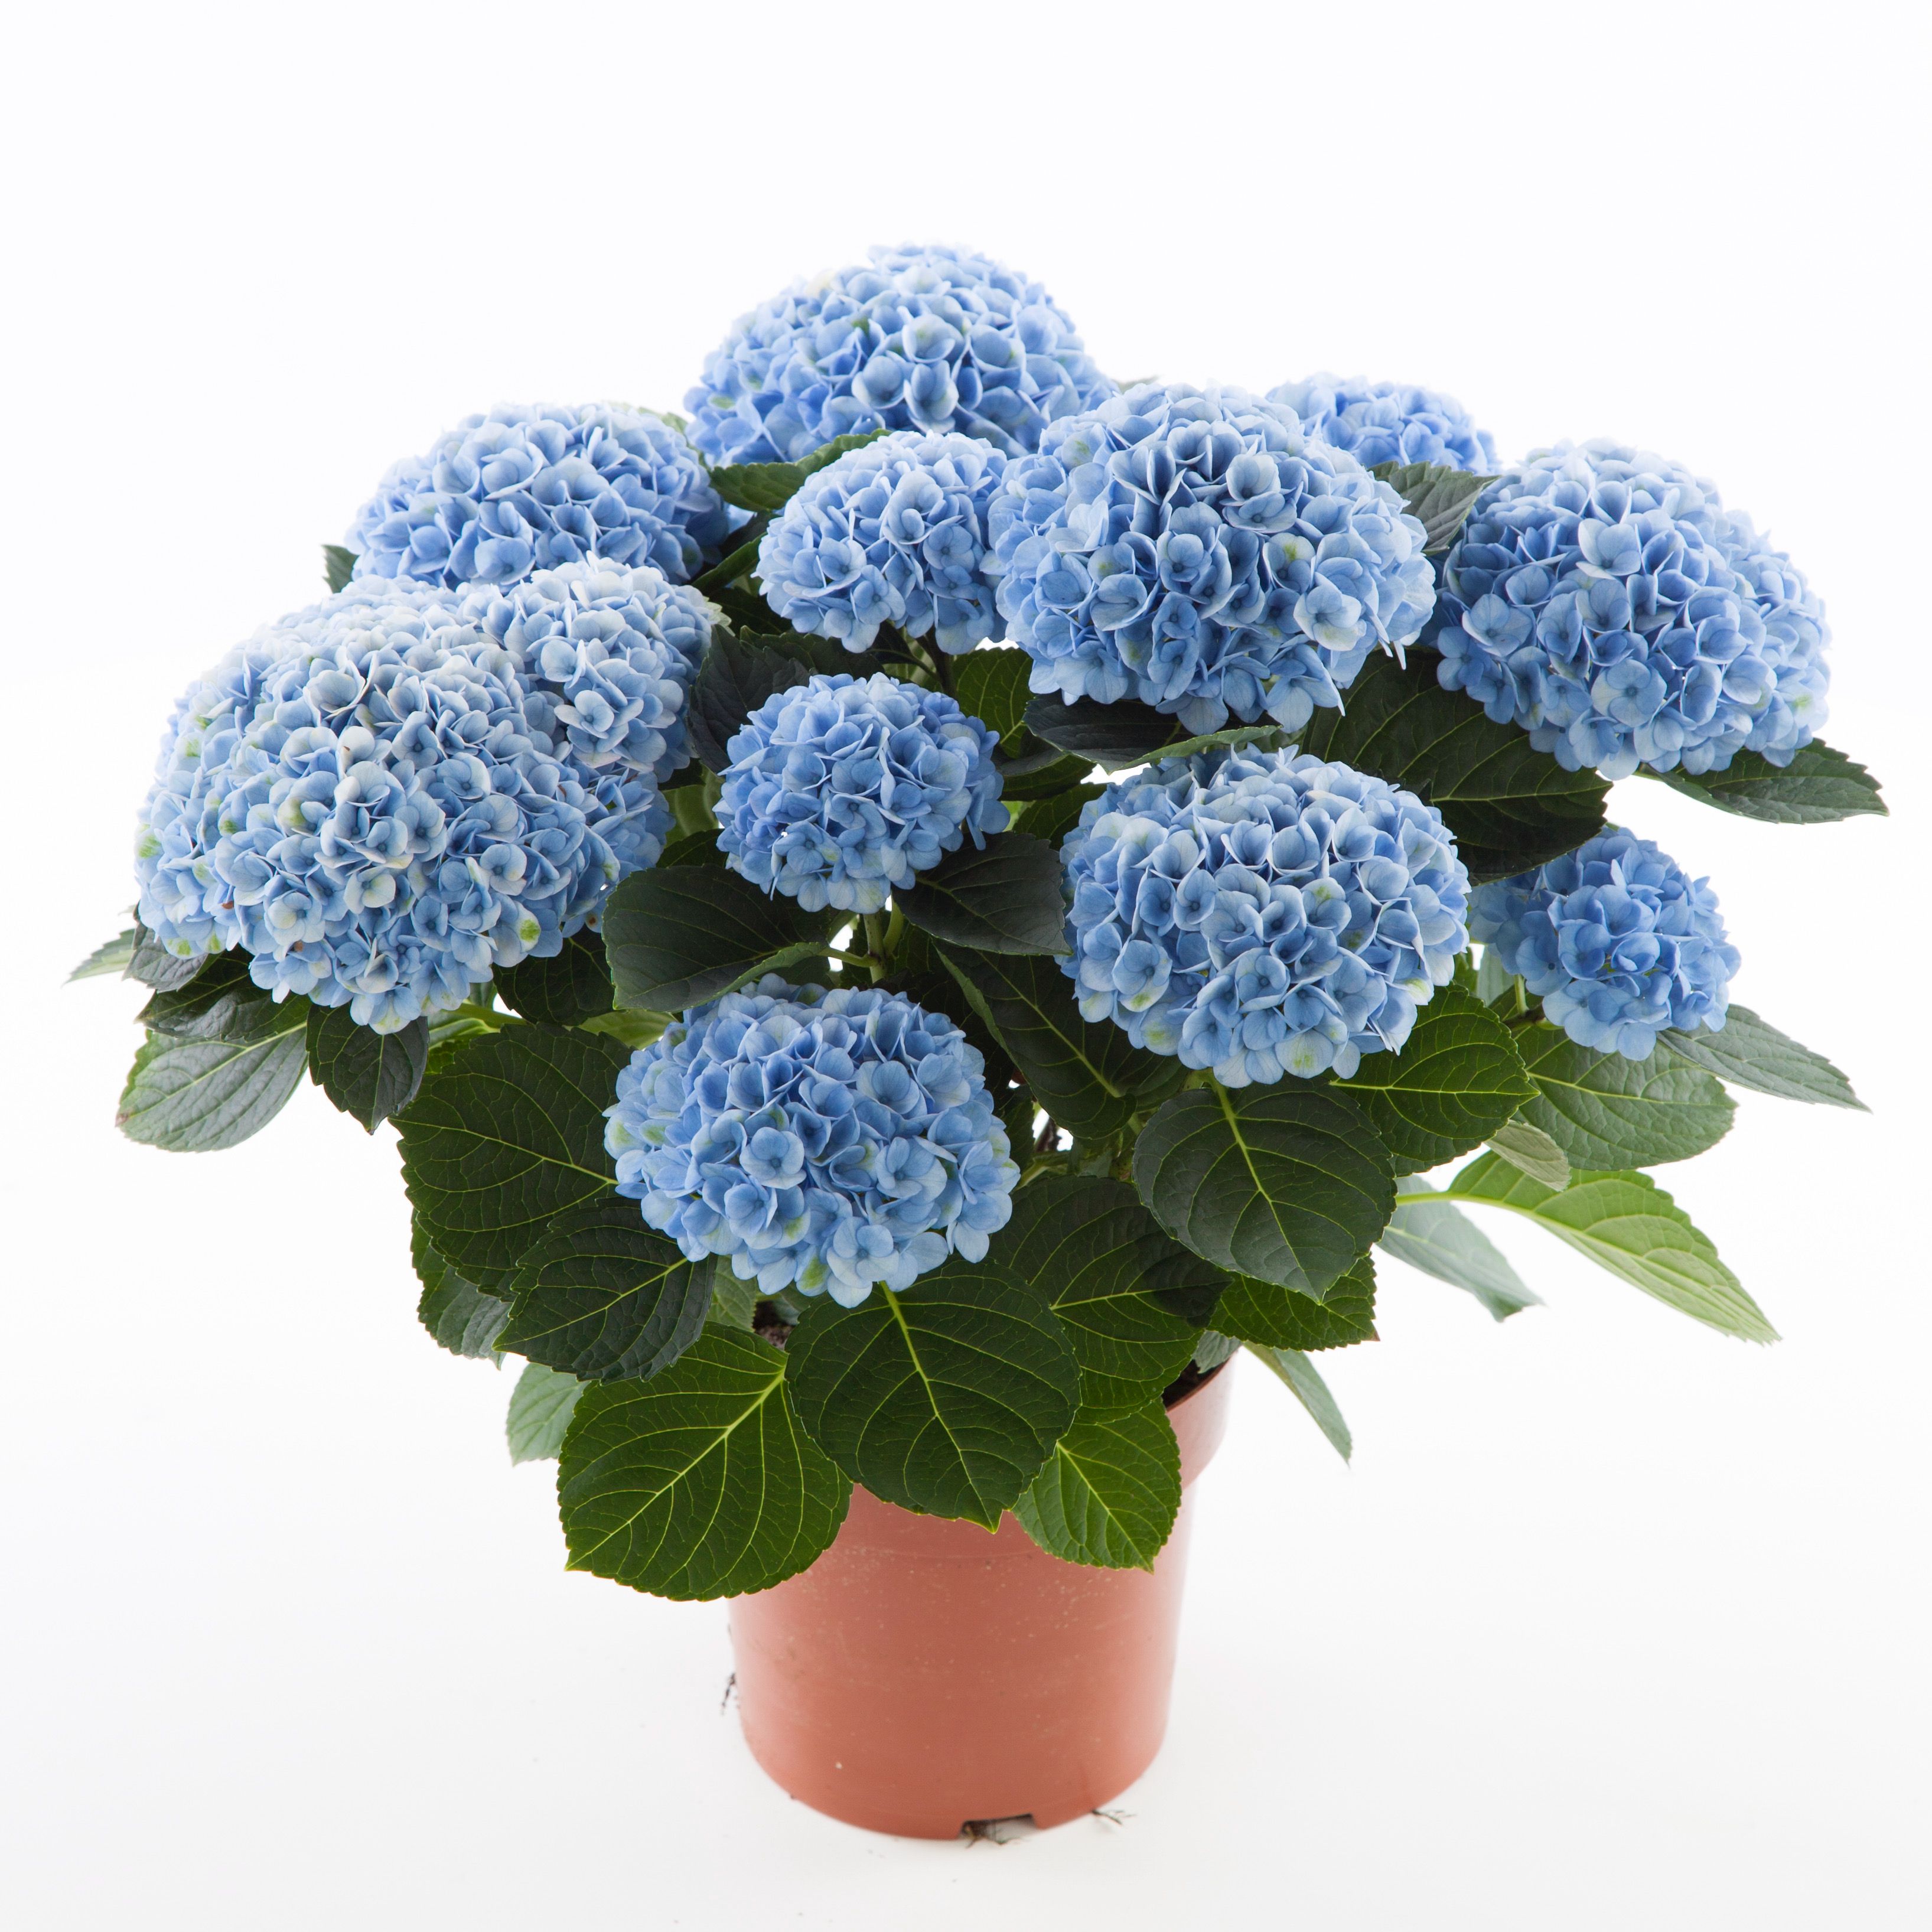 images/plants/hydrangea/hyd-magical-everlasting-revolution/hyd-magical-everlasting-revolution-0095.jpg